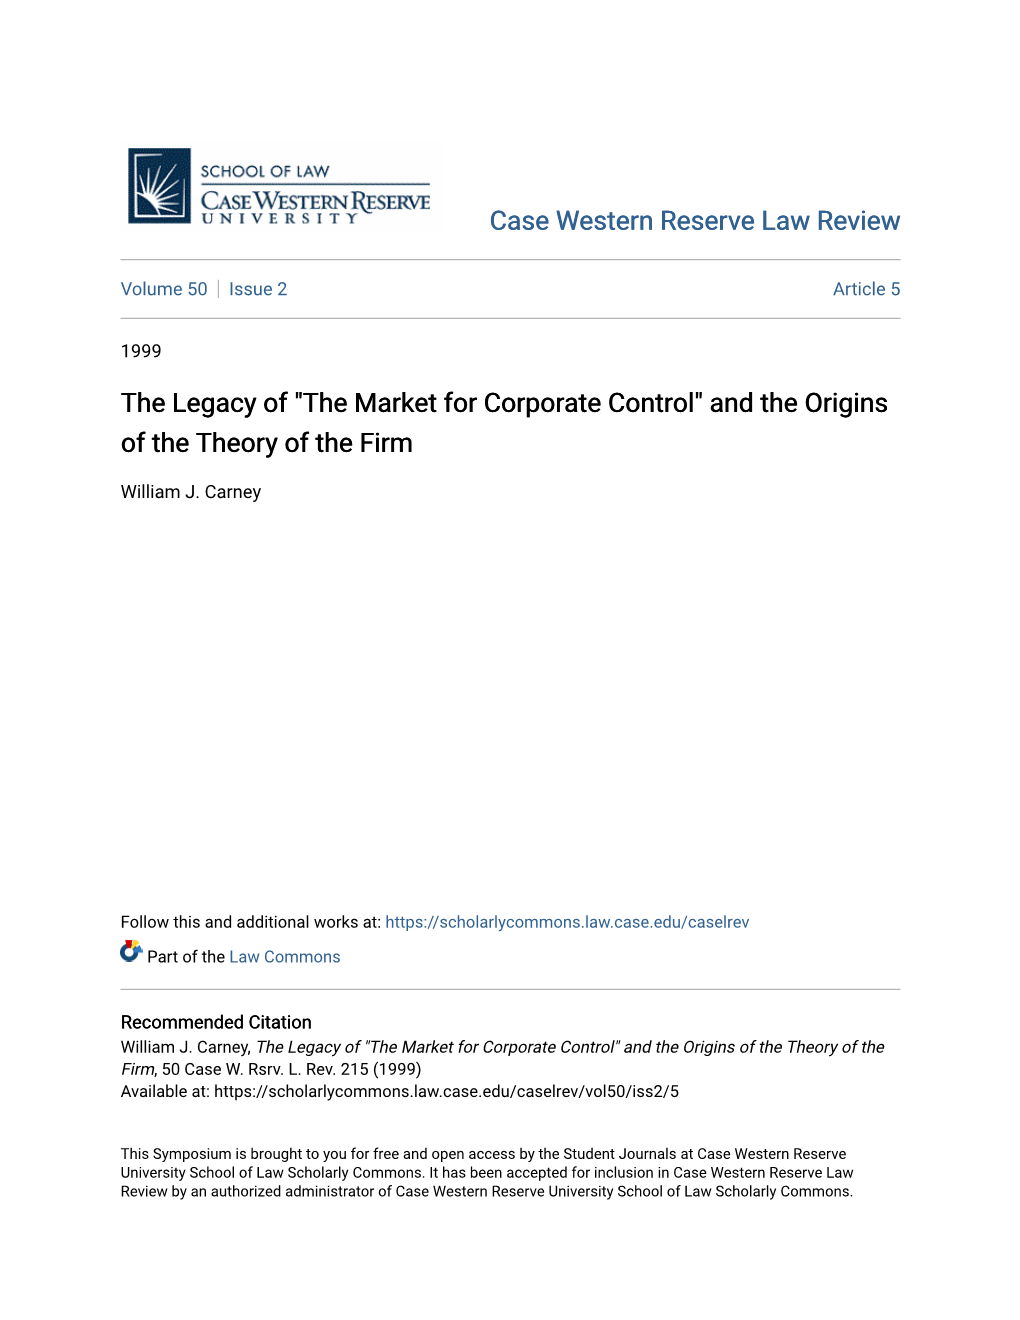 The Market for Corporate Control" and the Origins of the Theory of the Firm